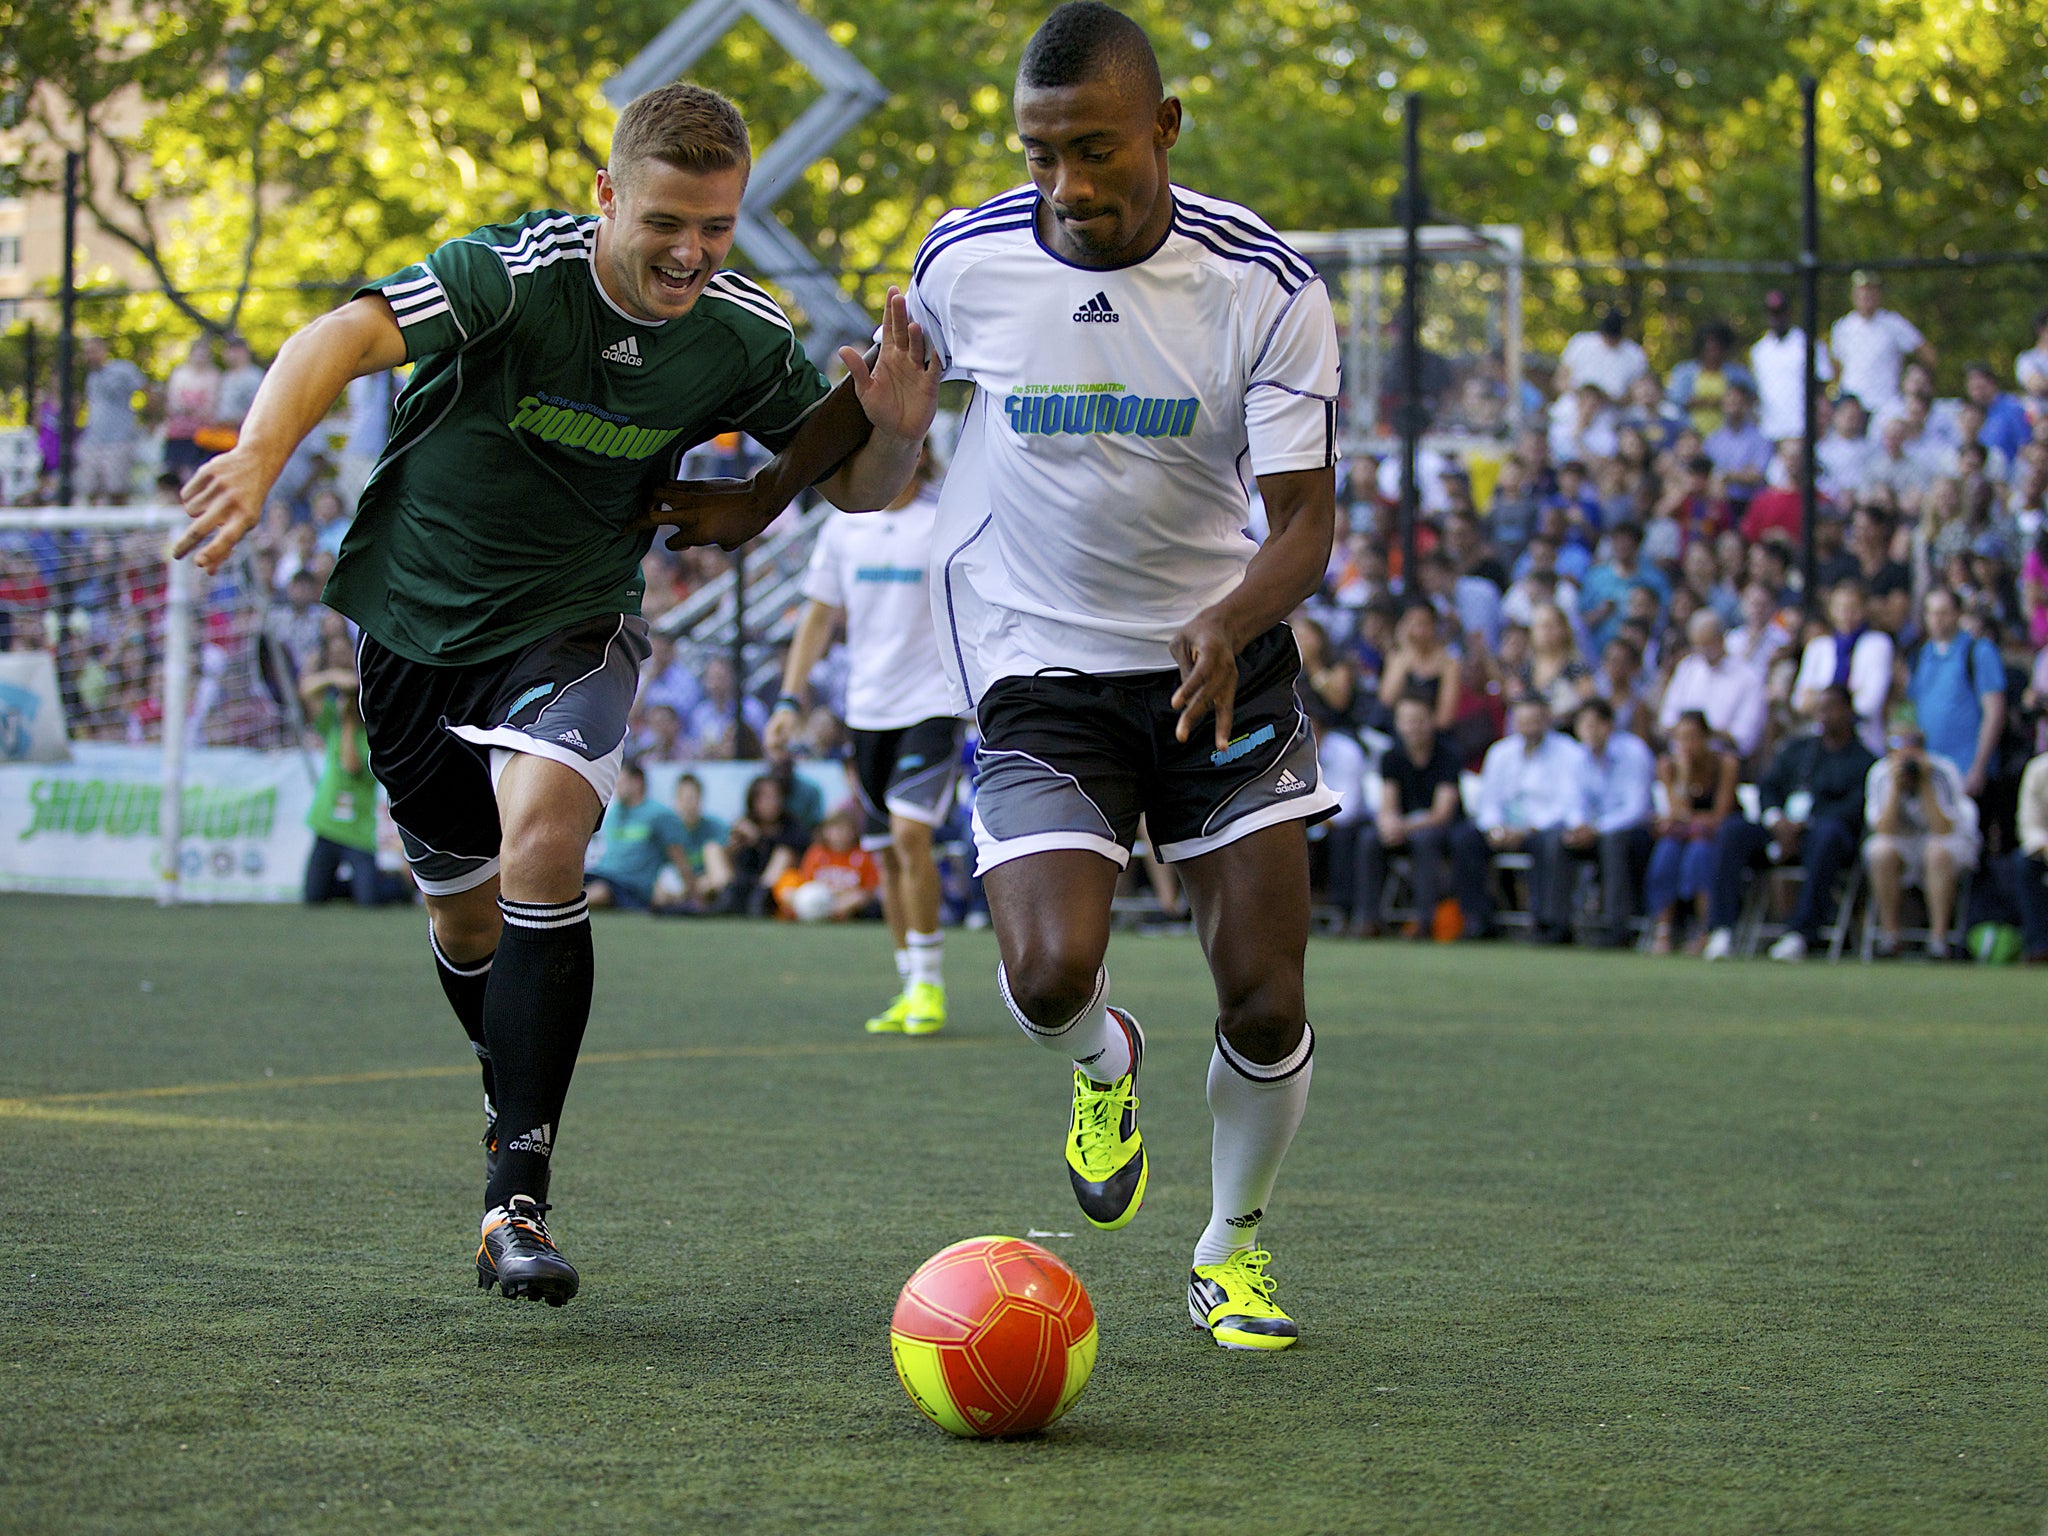 Robbie Rogers (left) takes on Chelsea’s Salomon Kalou in a charity event during the former’s time at Leeds